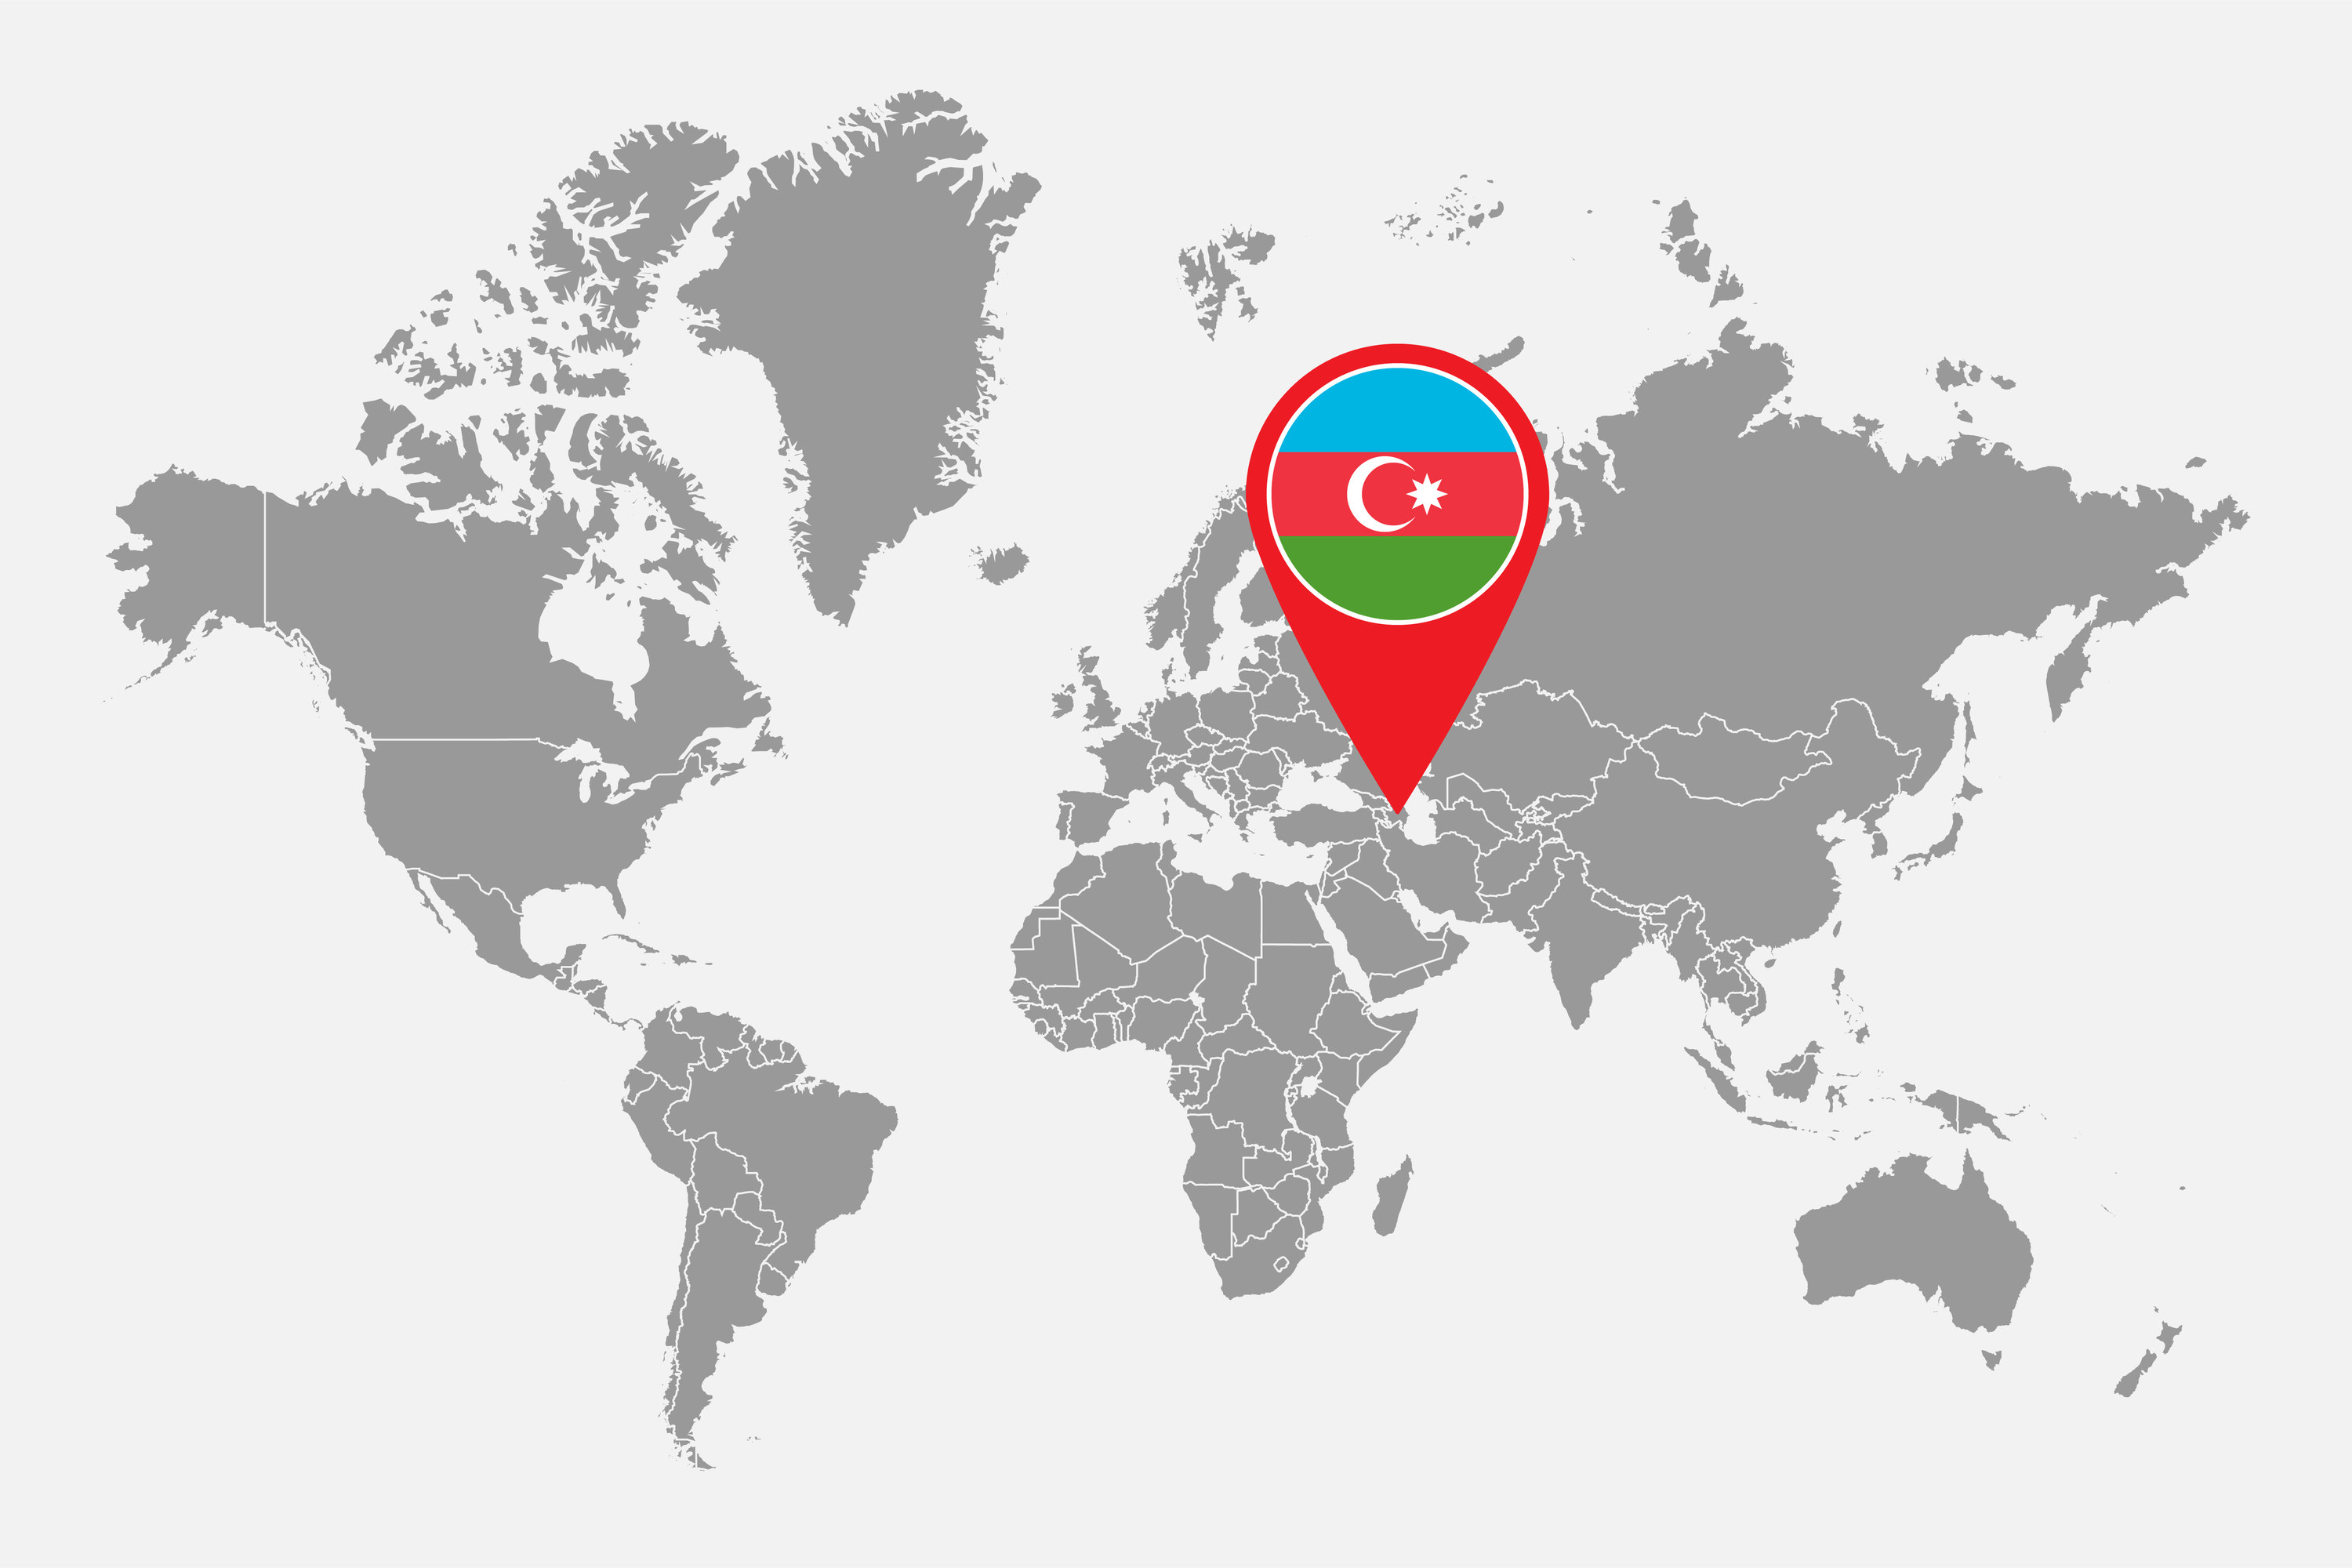 A world map with Azerbaijan indicated